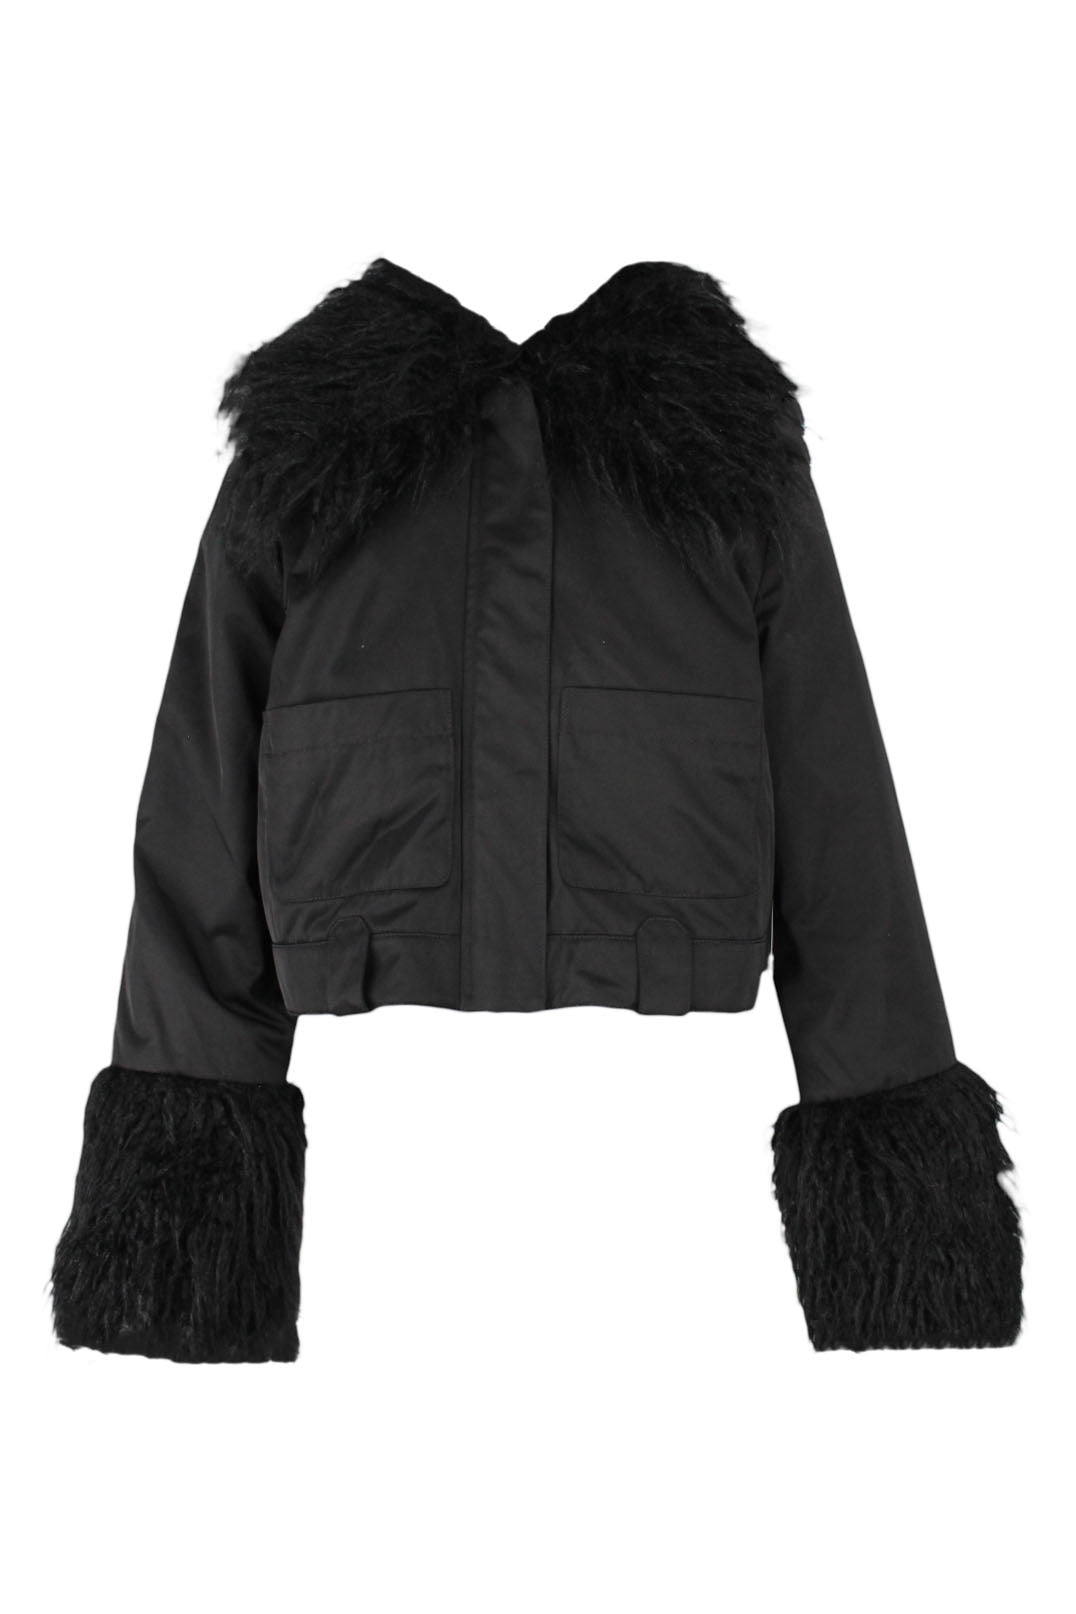 description: & other stories faux-fur collar and sleeves black jacket. features covered zipper closure at center front, and two slit pockets at front.